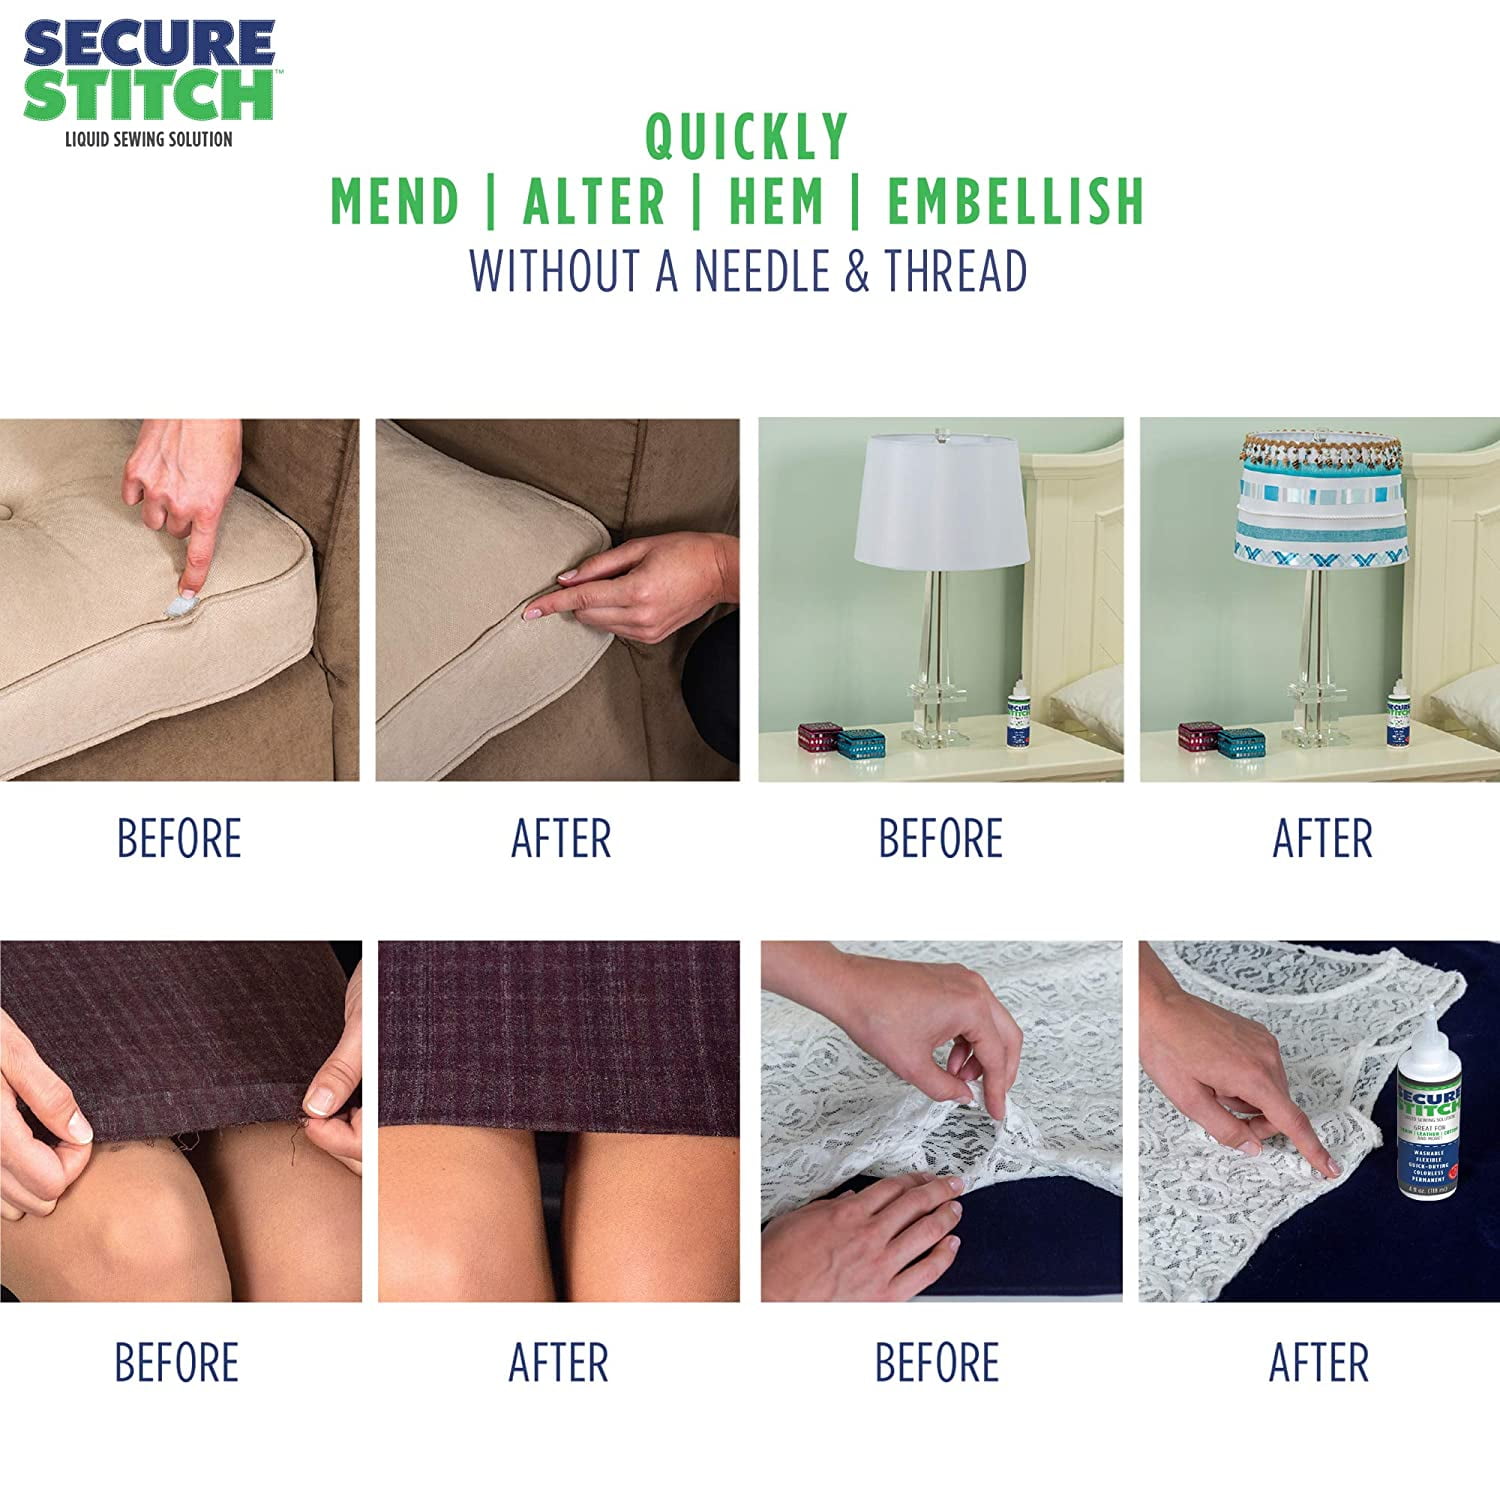 Secure Stitch - Liquid Sewing Solution